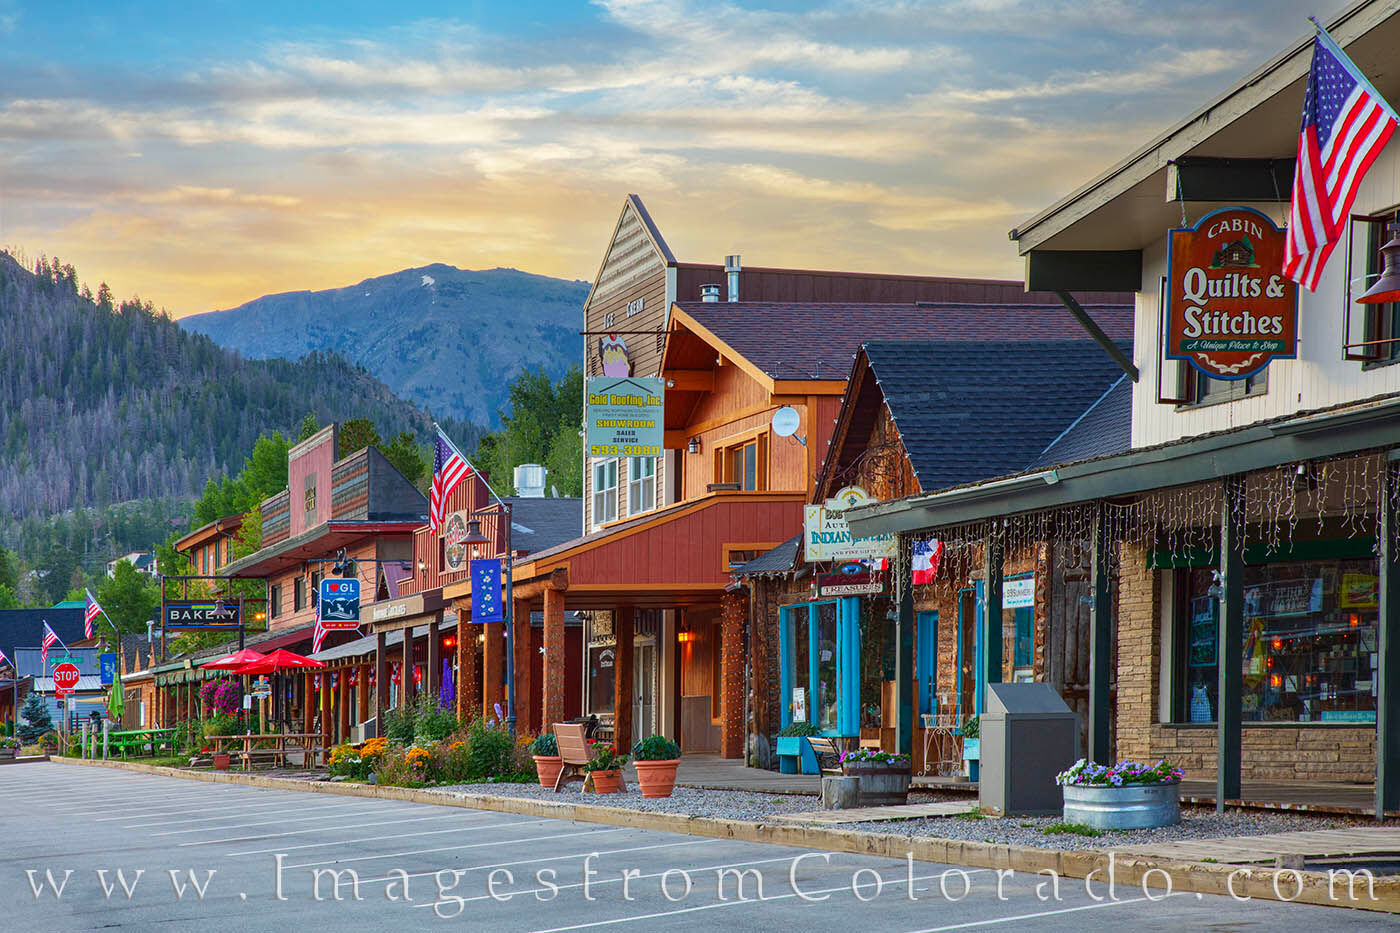 Just before sunrise, the streets are quiet in the resort town of Grand Lake, Colorado. As a jumping off point for Rocky Mountain...